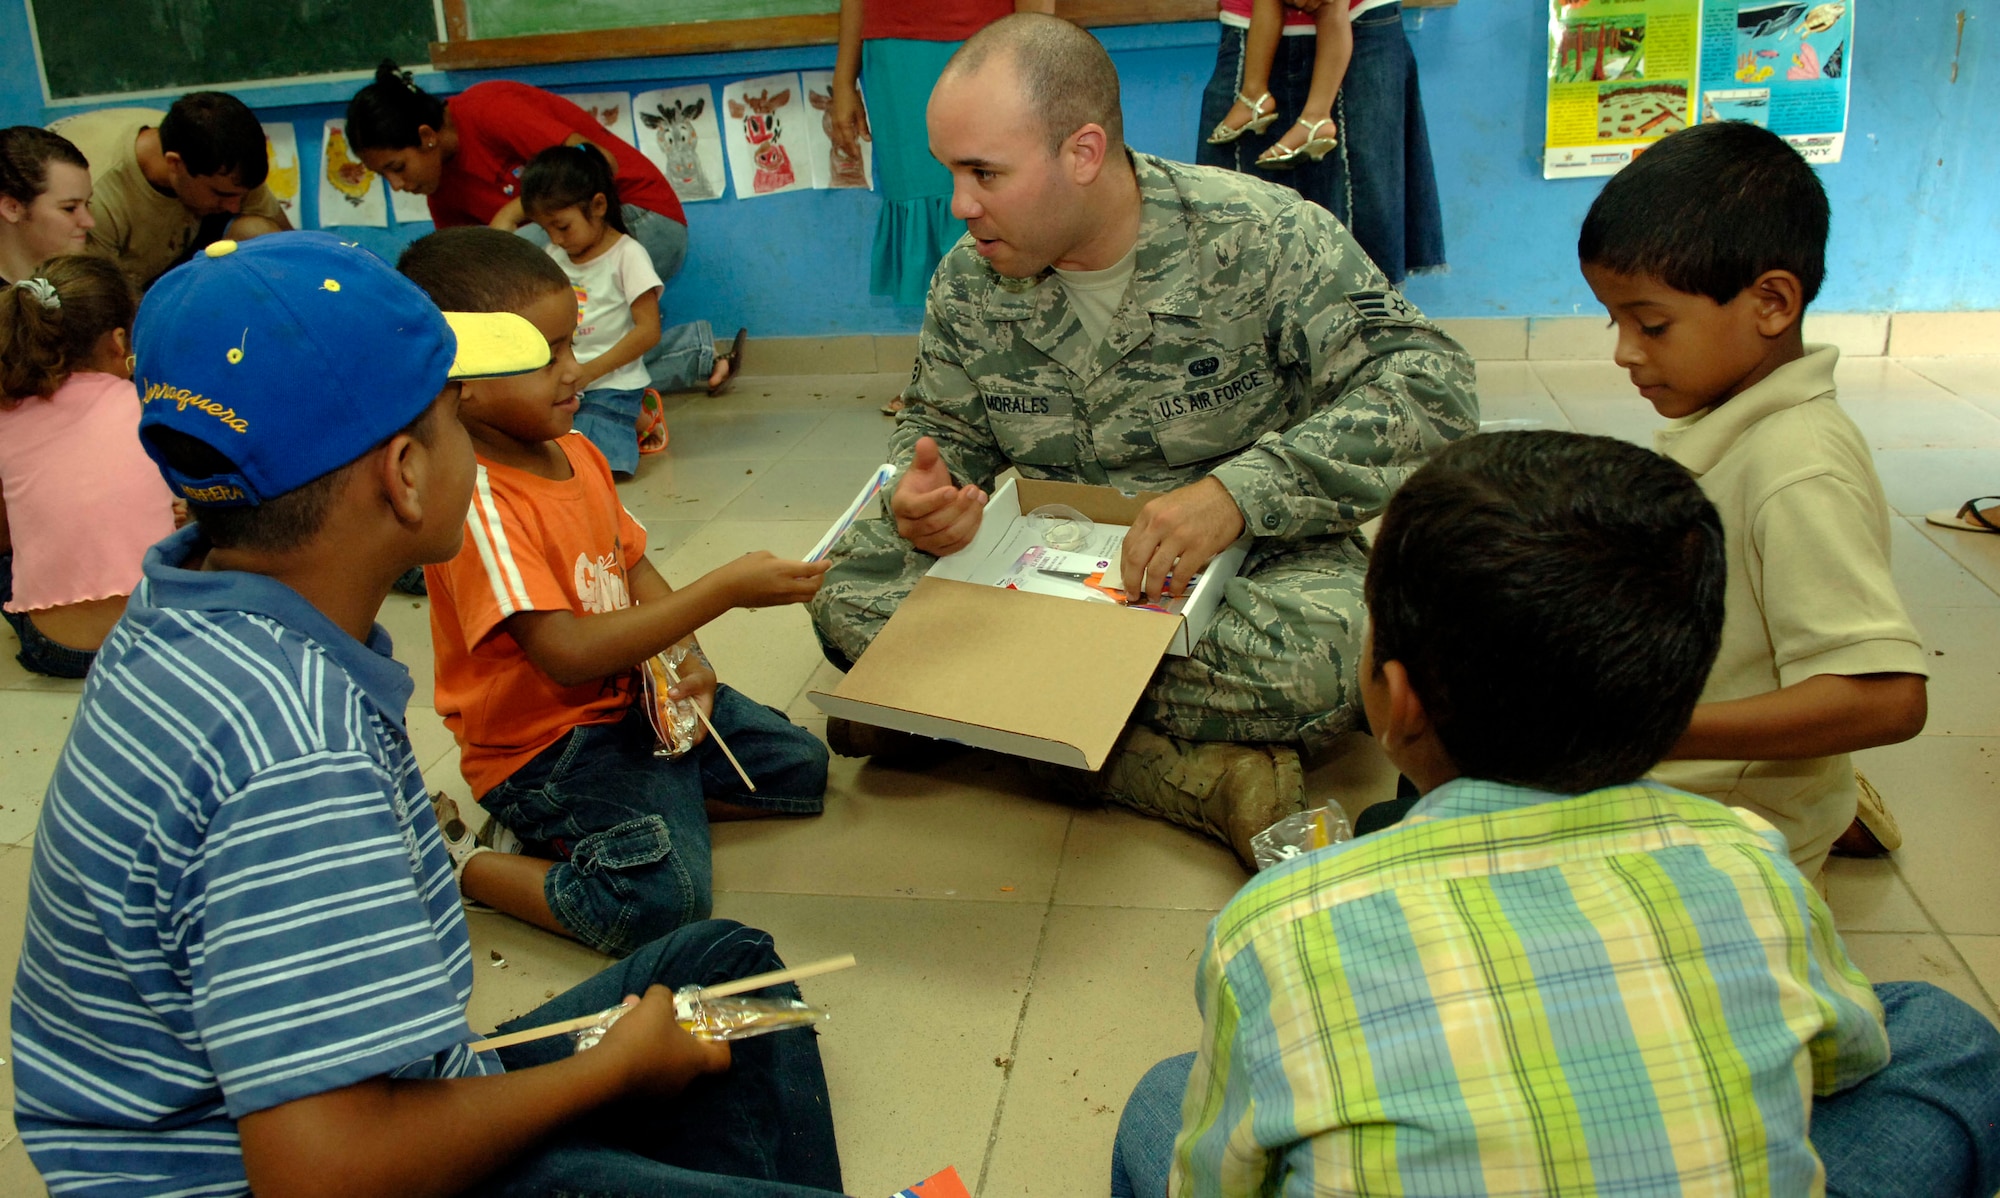 Senior Airman Cesar Morales, 820th Expeditionary RED HORSE Squadron, helps children assemble rubber band airplanes at the Sansonsito School July 12. (U.S. Air Force photo/Tech. Sgt. Eric Petosky)